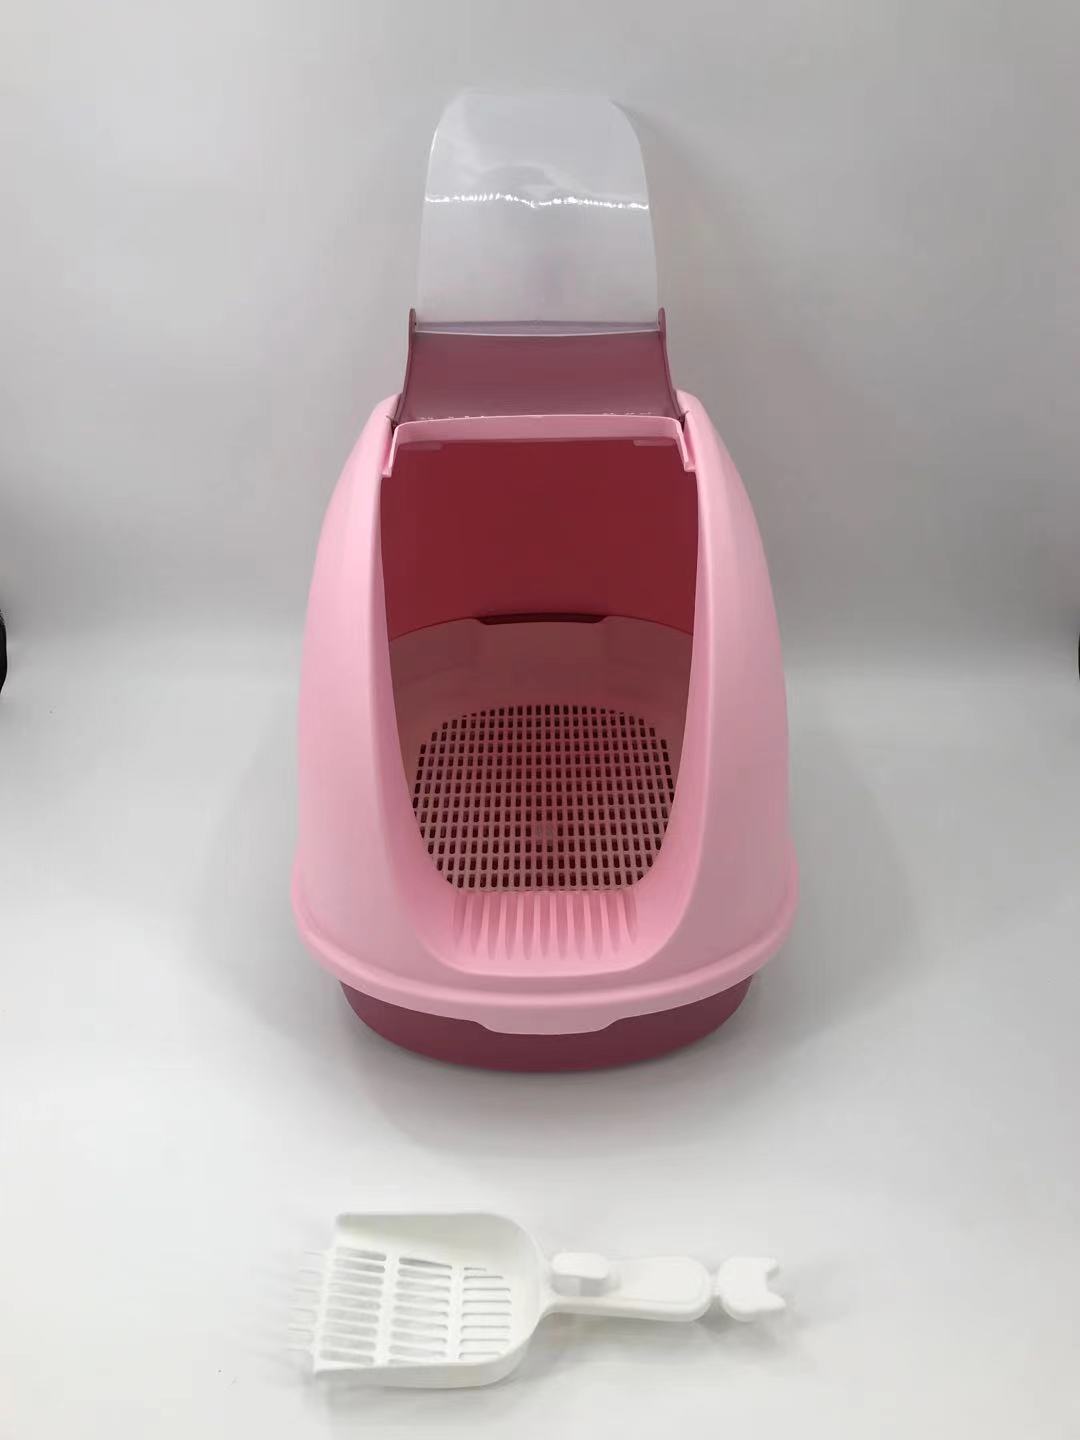 YES4PETS Portable Hooded Cat Toilet Litter Box Tray House With Scoop and Grid Tray Pink